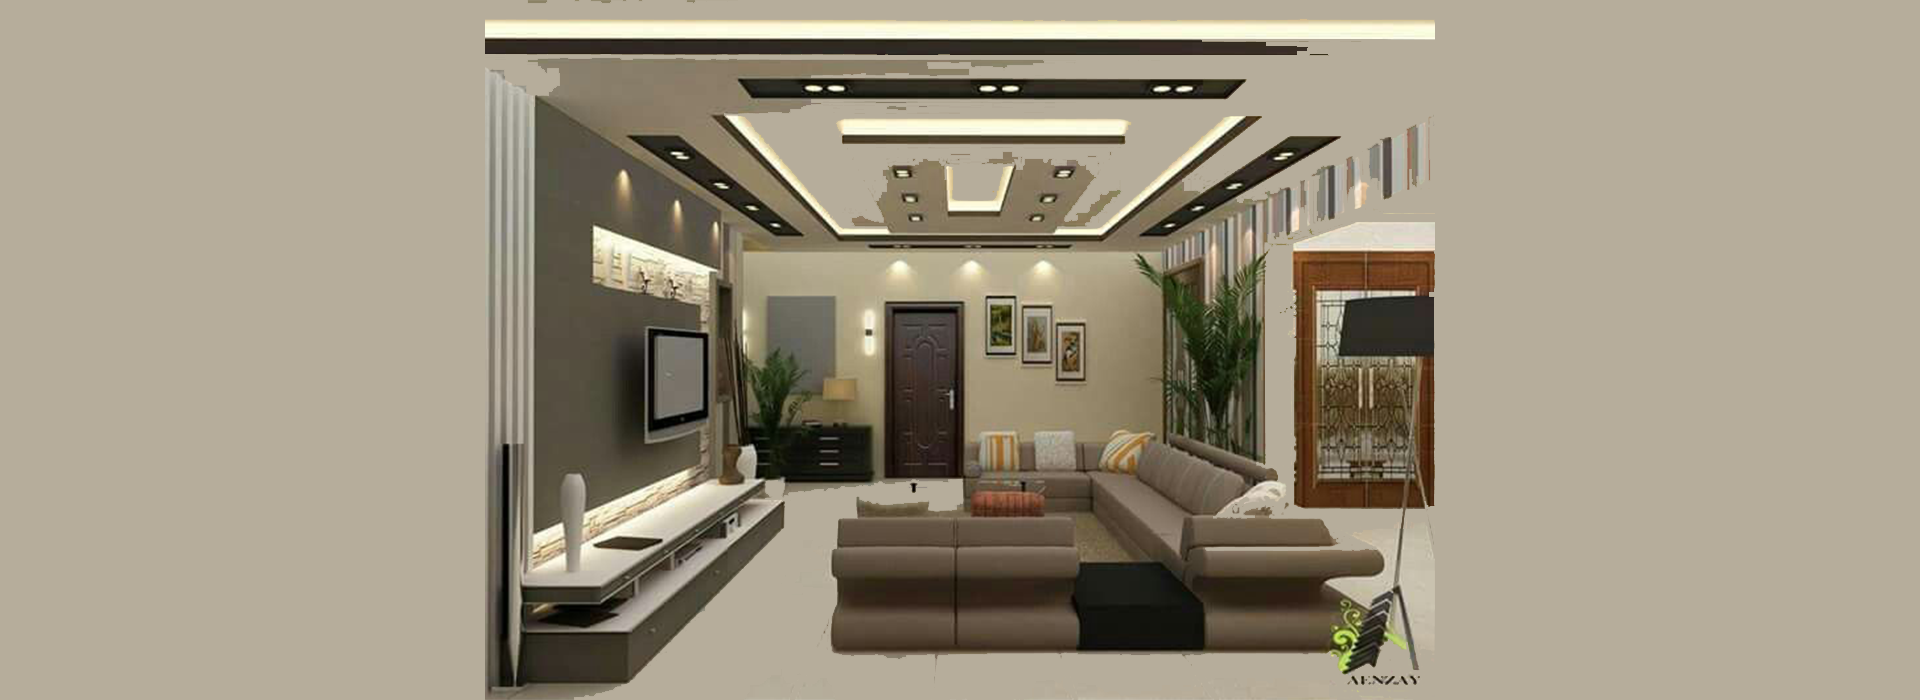 Electrical work Contractors in Chennai